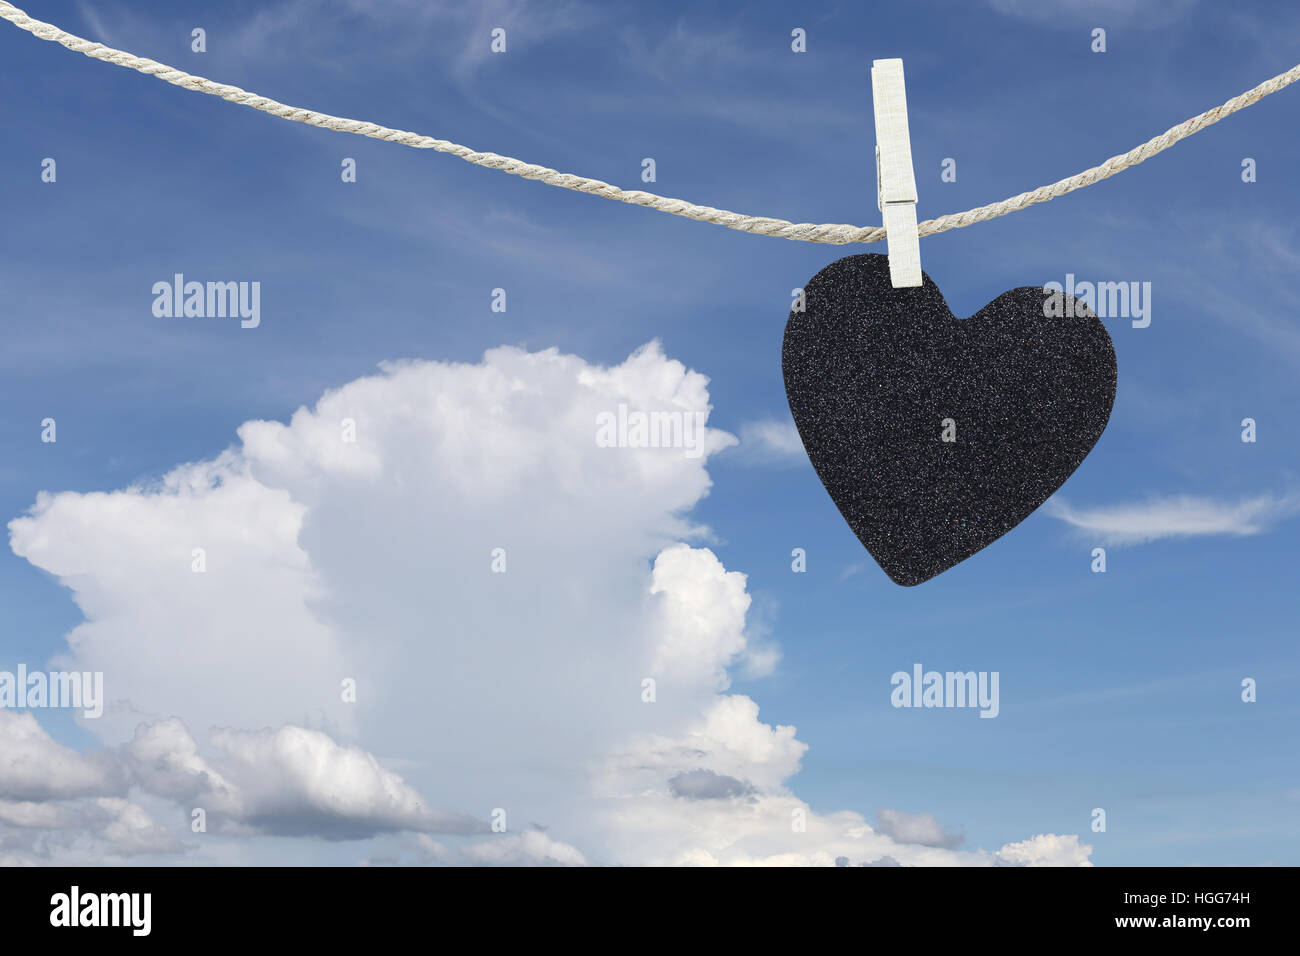 Black Heart hung on hemp rope on blue sky background and have copy space to manage the text you want. Stock Photo